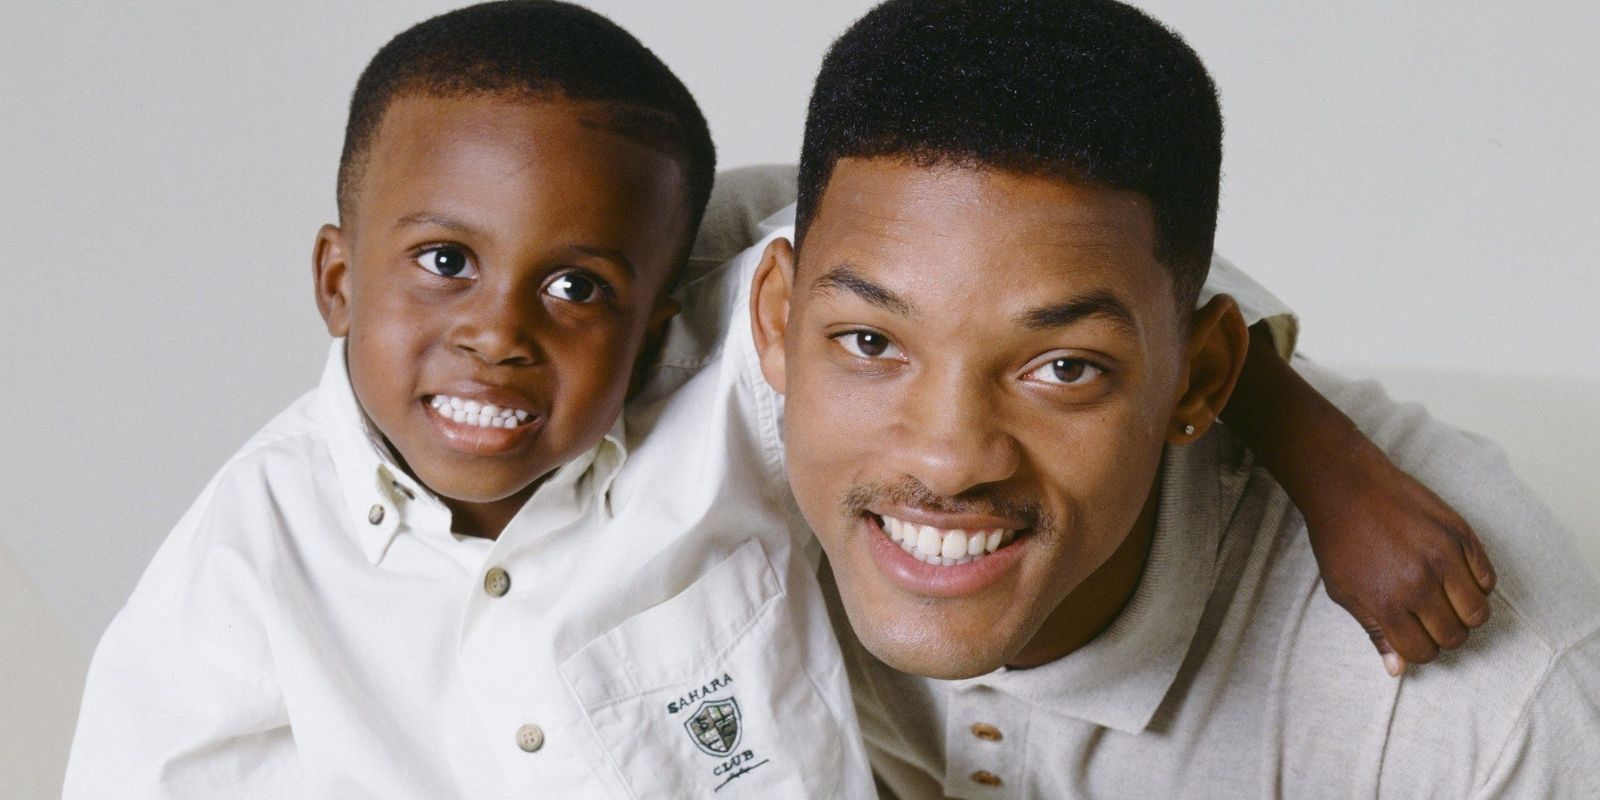 Nicky Banks and Will Smith in The Fresh Prince of Bel Air